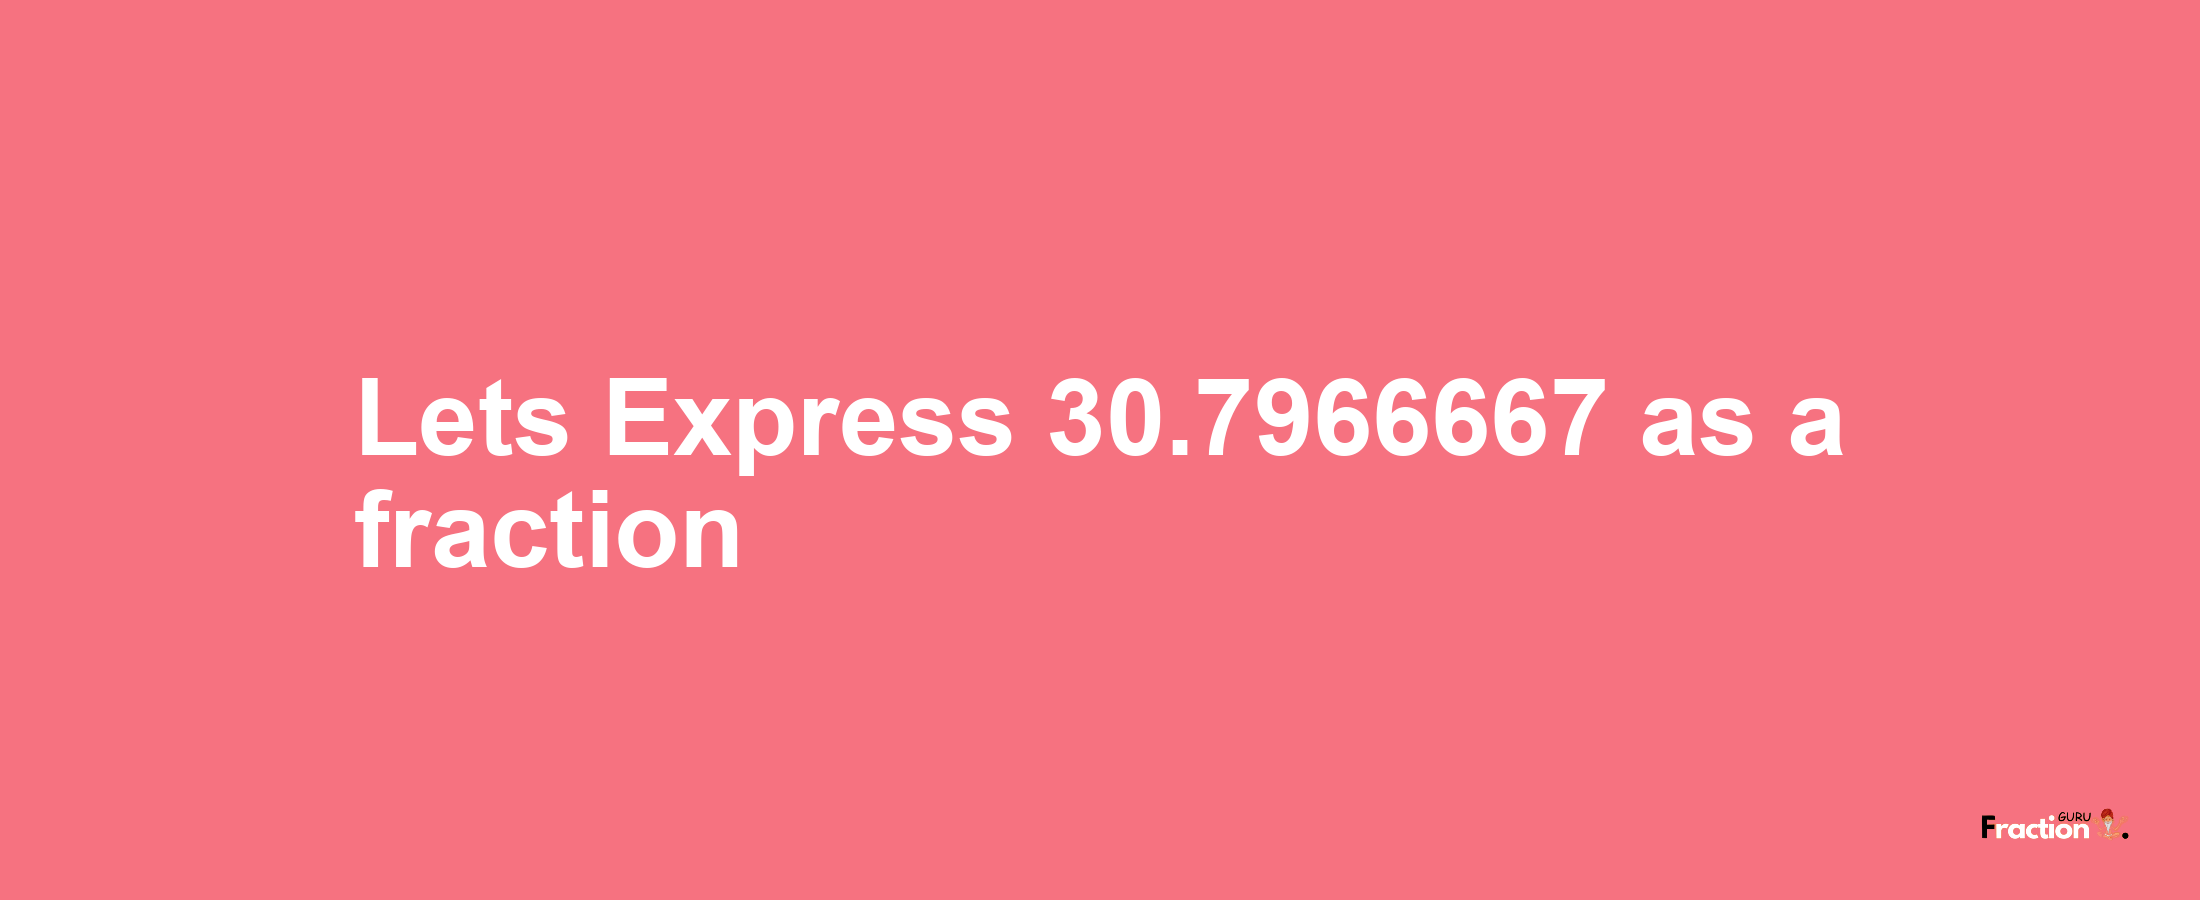 Lets Express 30.7966667 as afraction